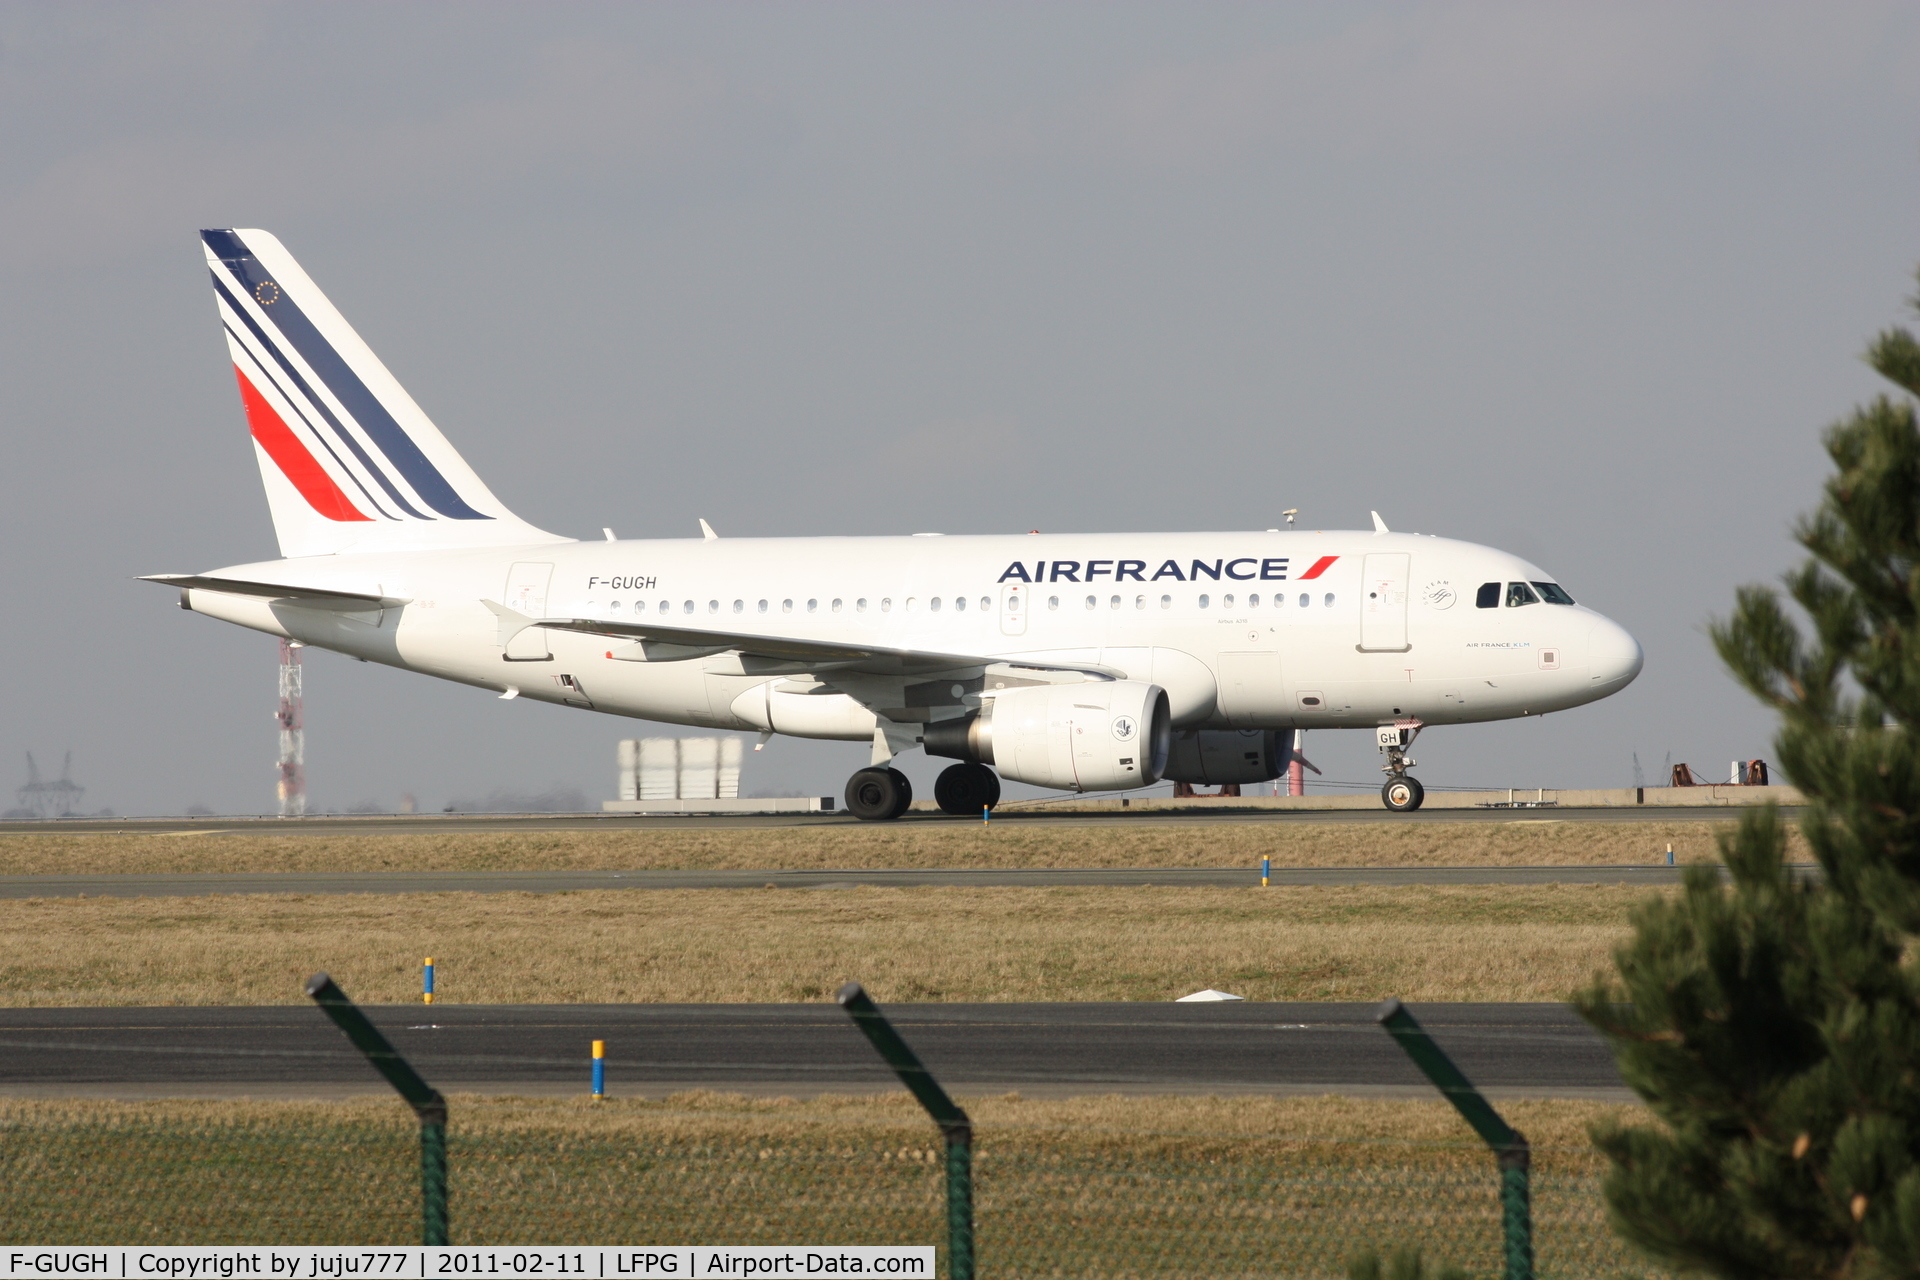 F-GUGH, 2004 Airbus A318-111 C/N 2344, with new Air France color